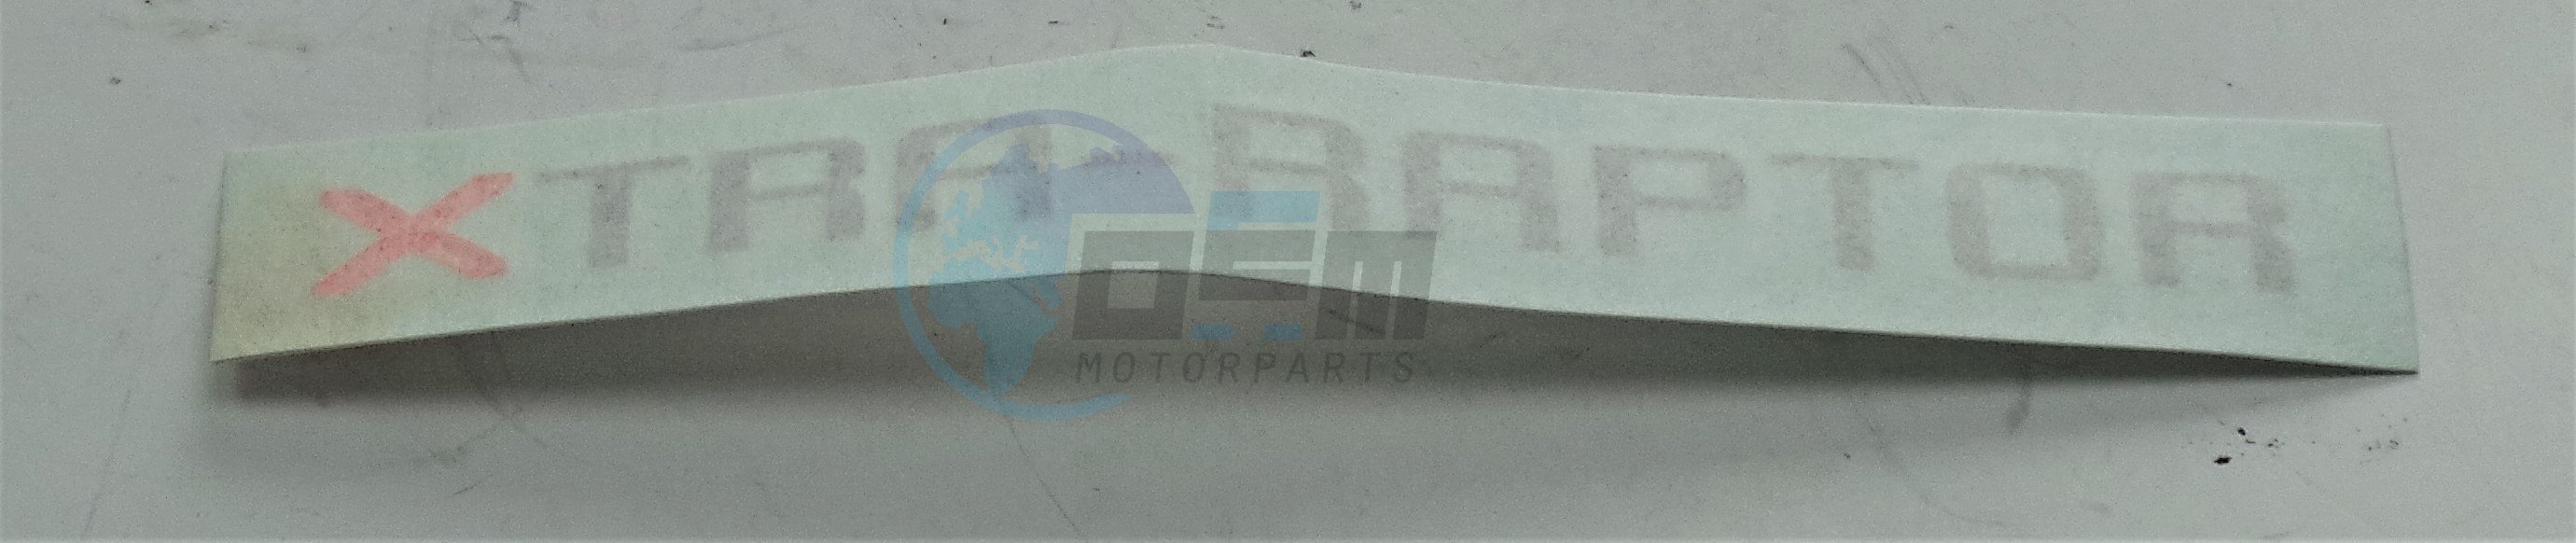 Product image: Cagiva - 800098819 - DECAL X-TRA RAPTOR  Parts can be in primer only  0